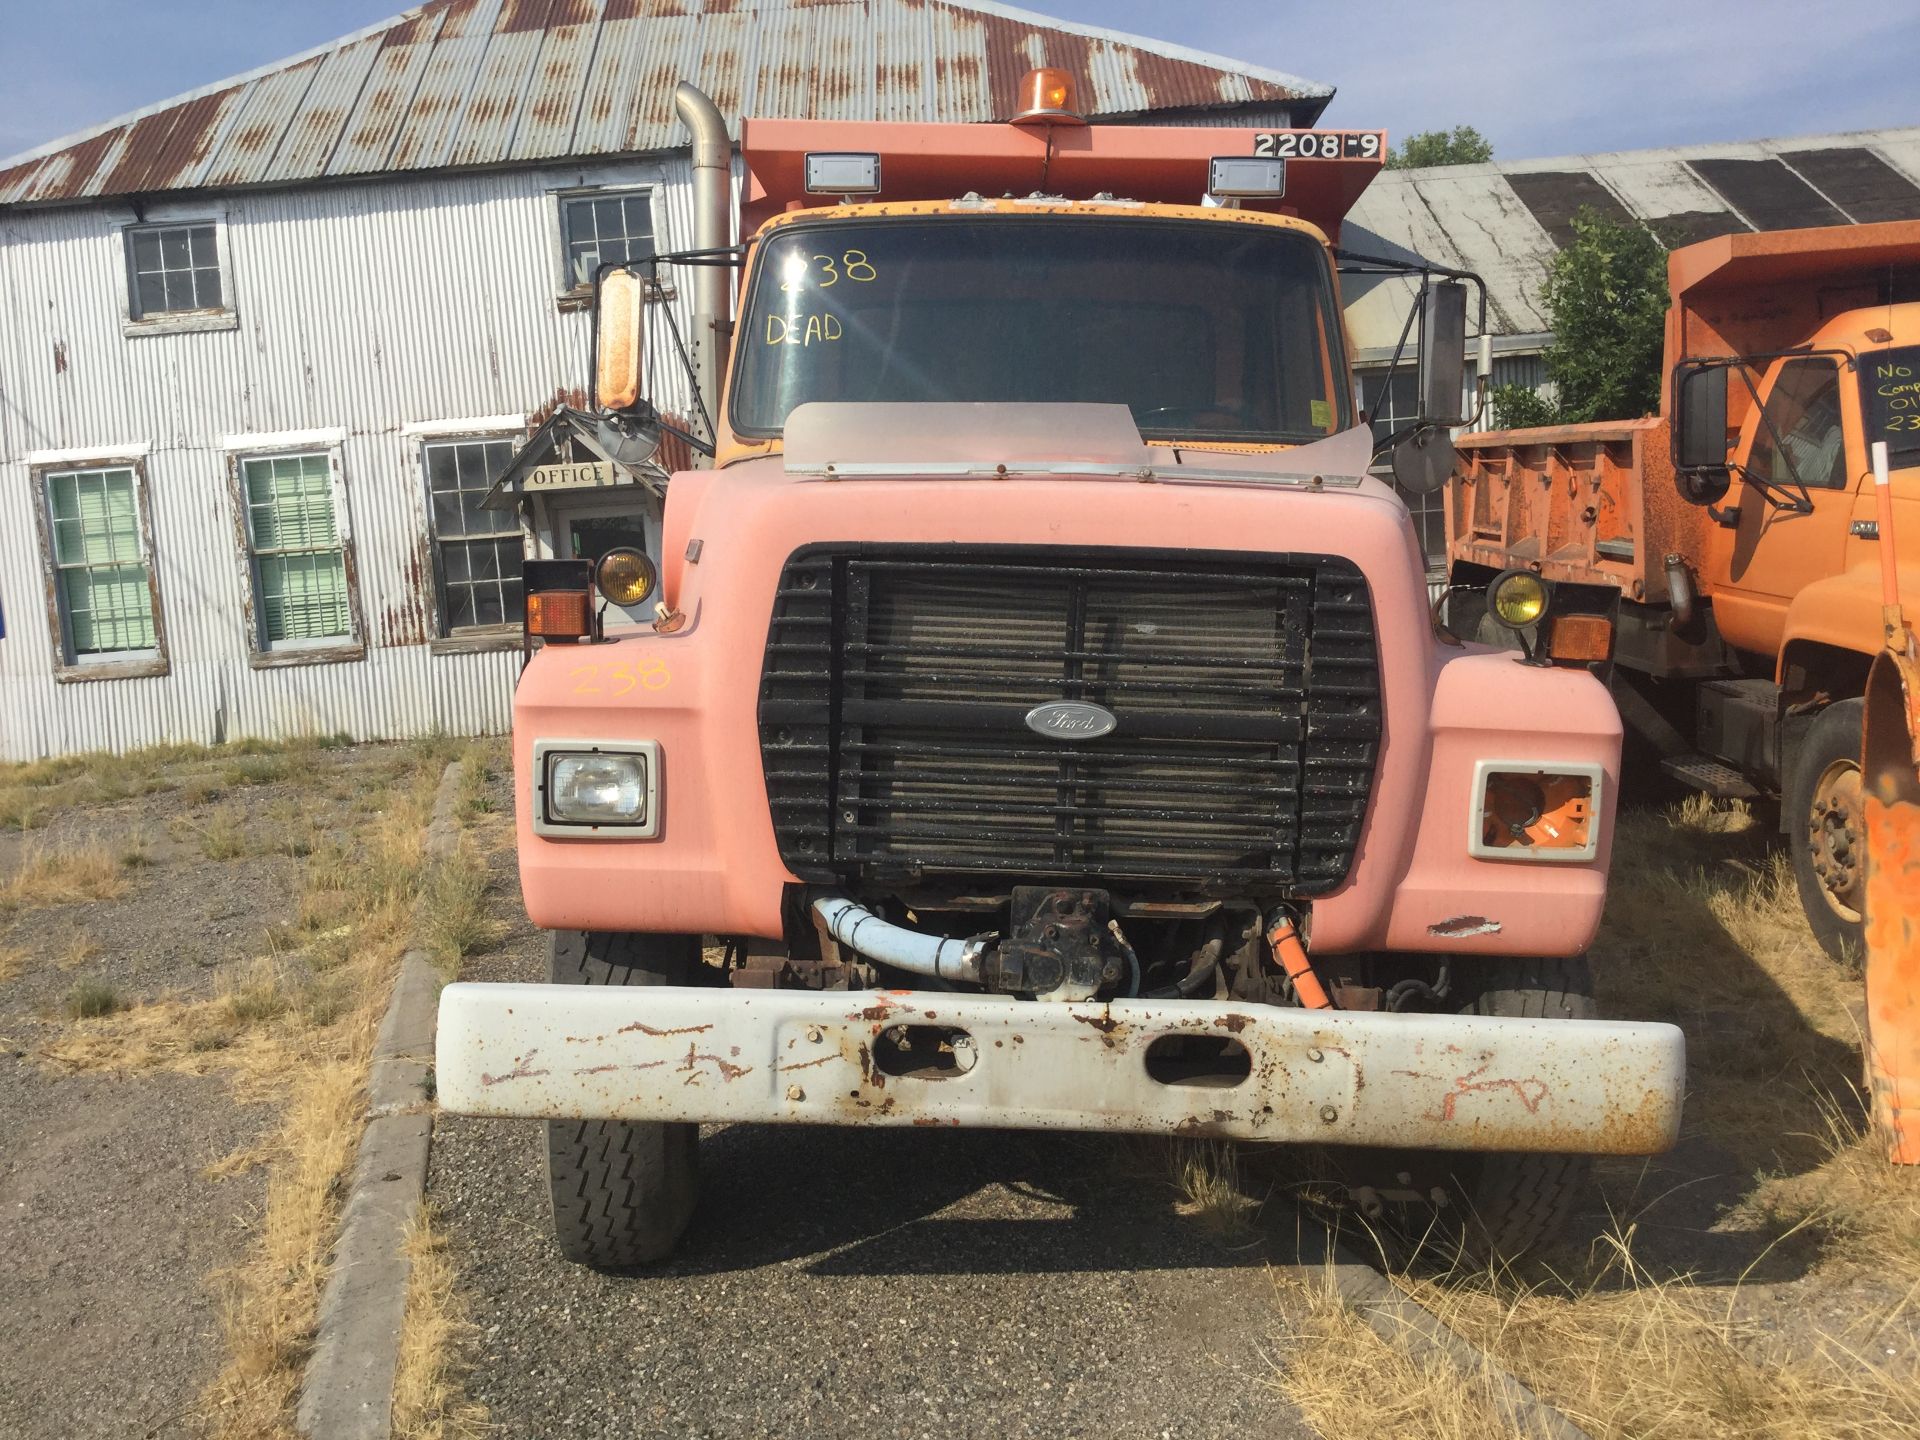 Year: 1992 Make: Ford Model: L9000 Type: Dump Truck Vin#: A33754 Mileage/Hours: 345000 10L - Image 2 of 7